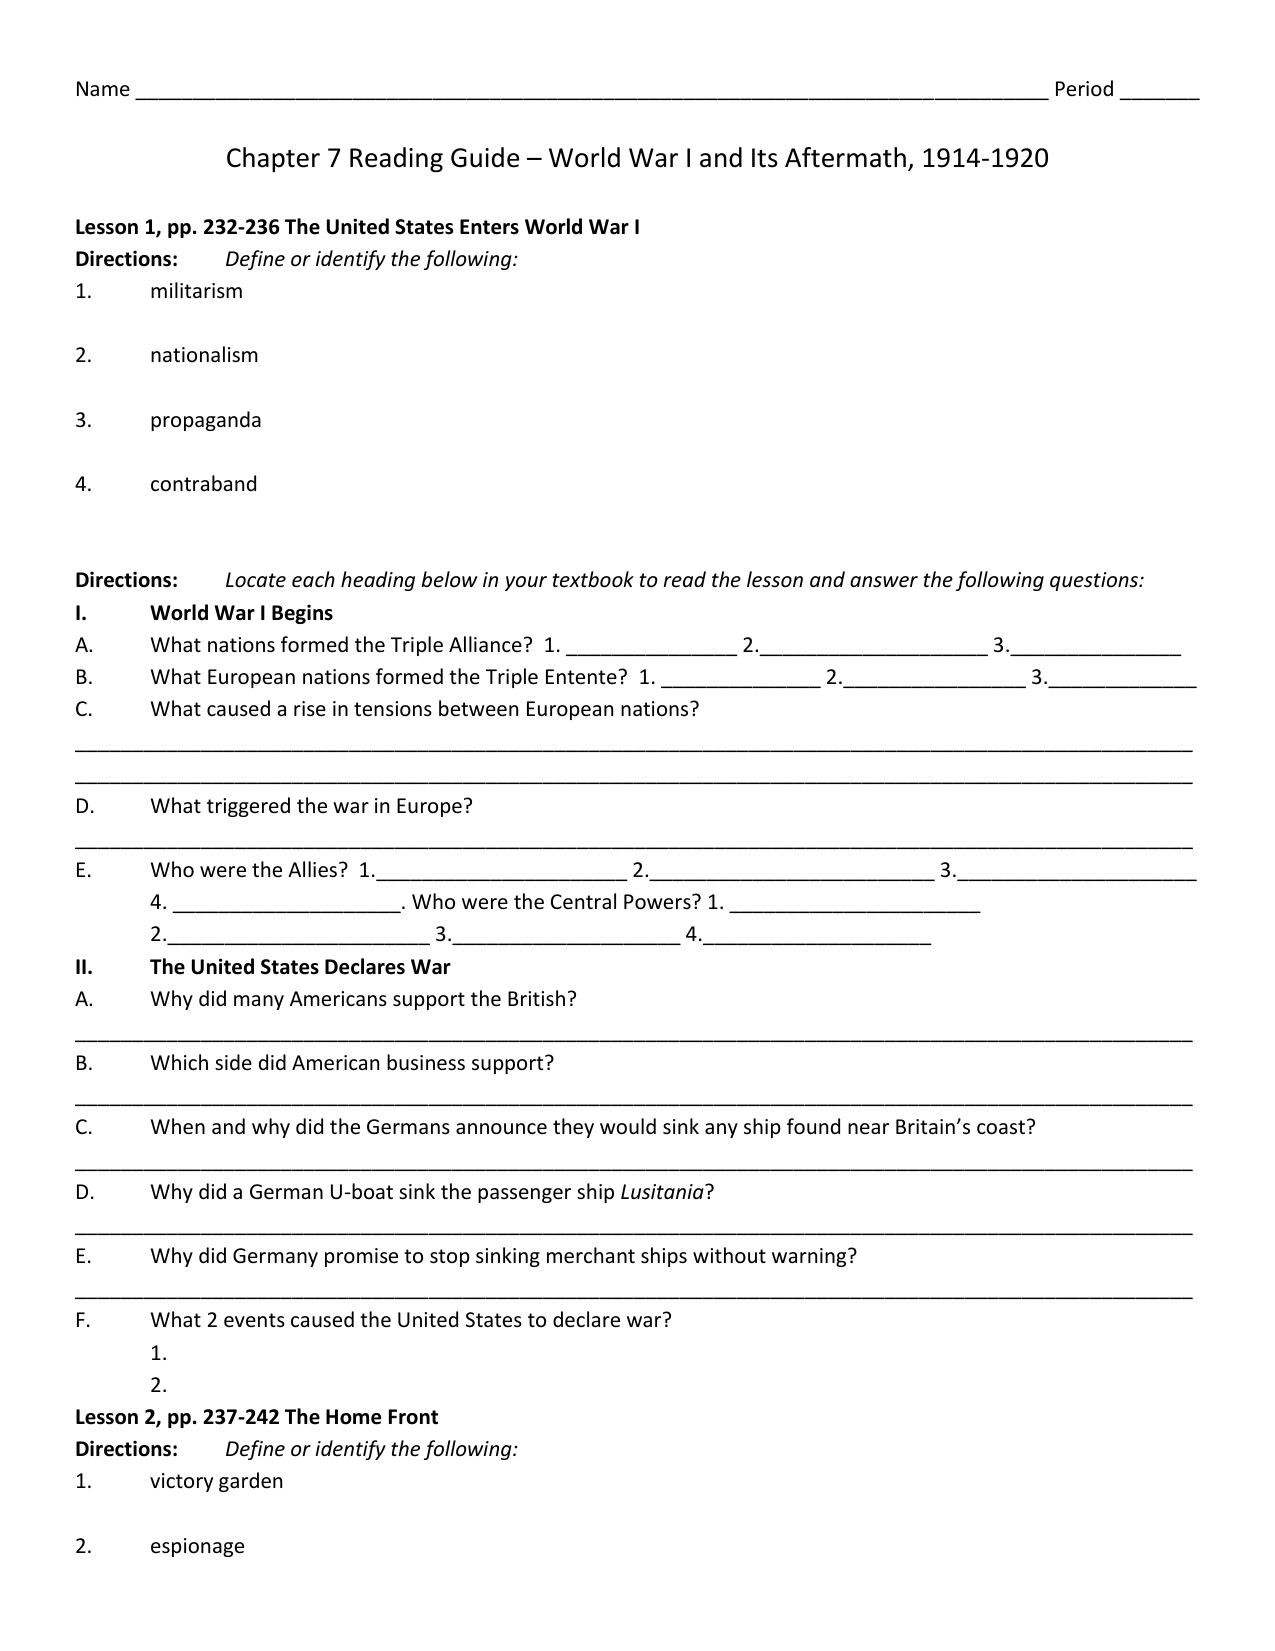 Chapter 7 Reading Guide – World War I And Its Aftermath 19141920 Regarding World War 1 And Its Aftermath Worksheet Answers